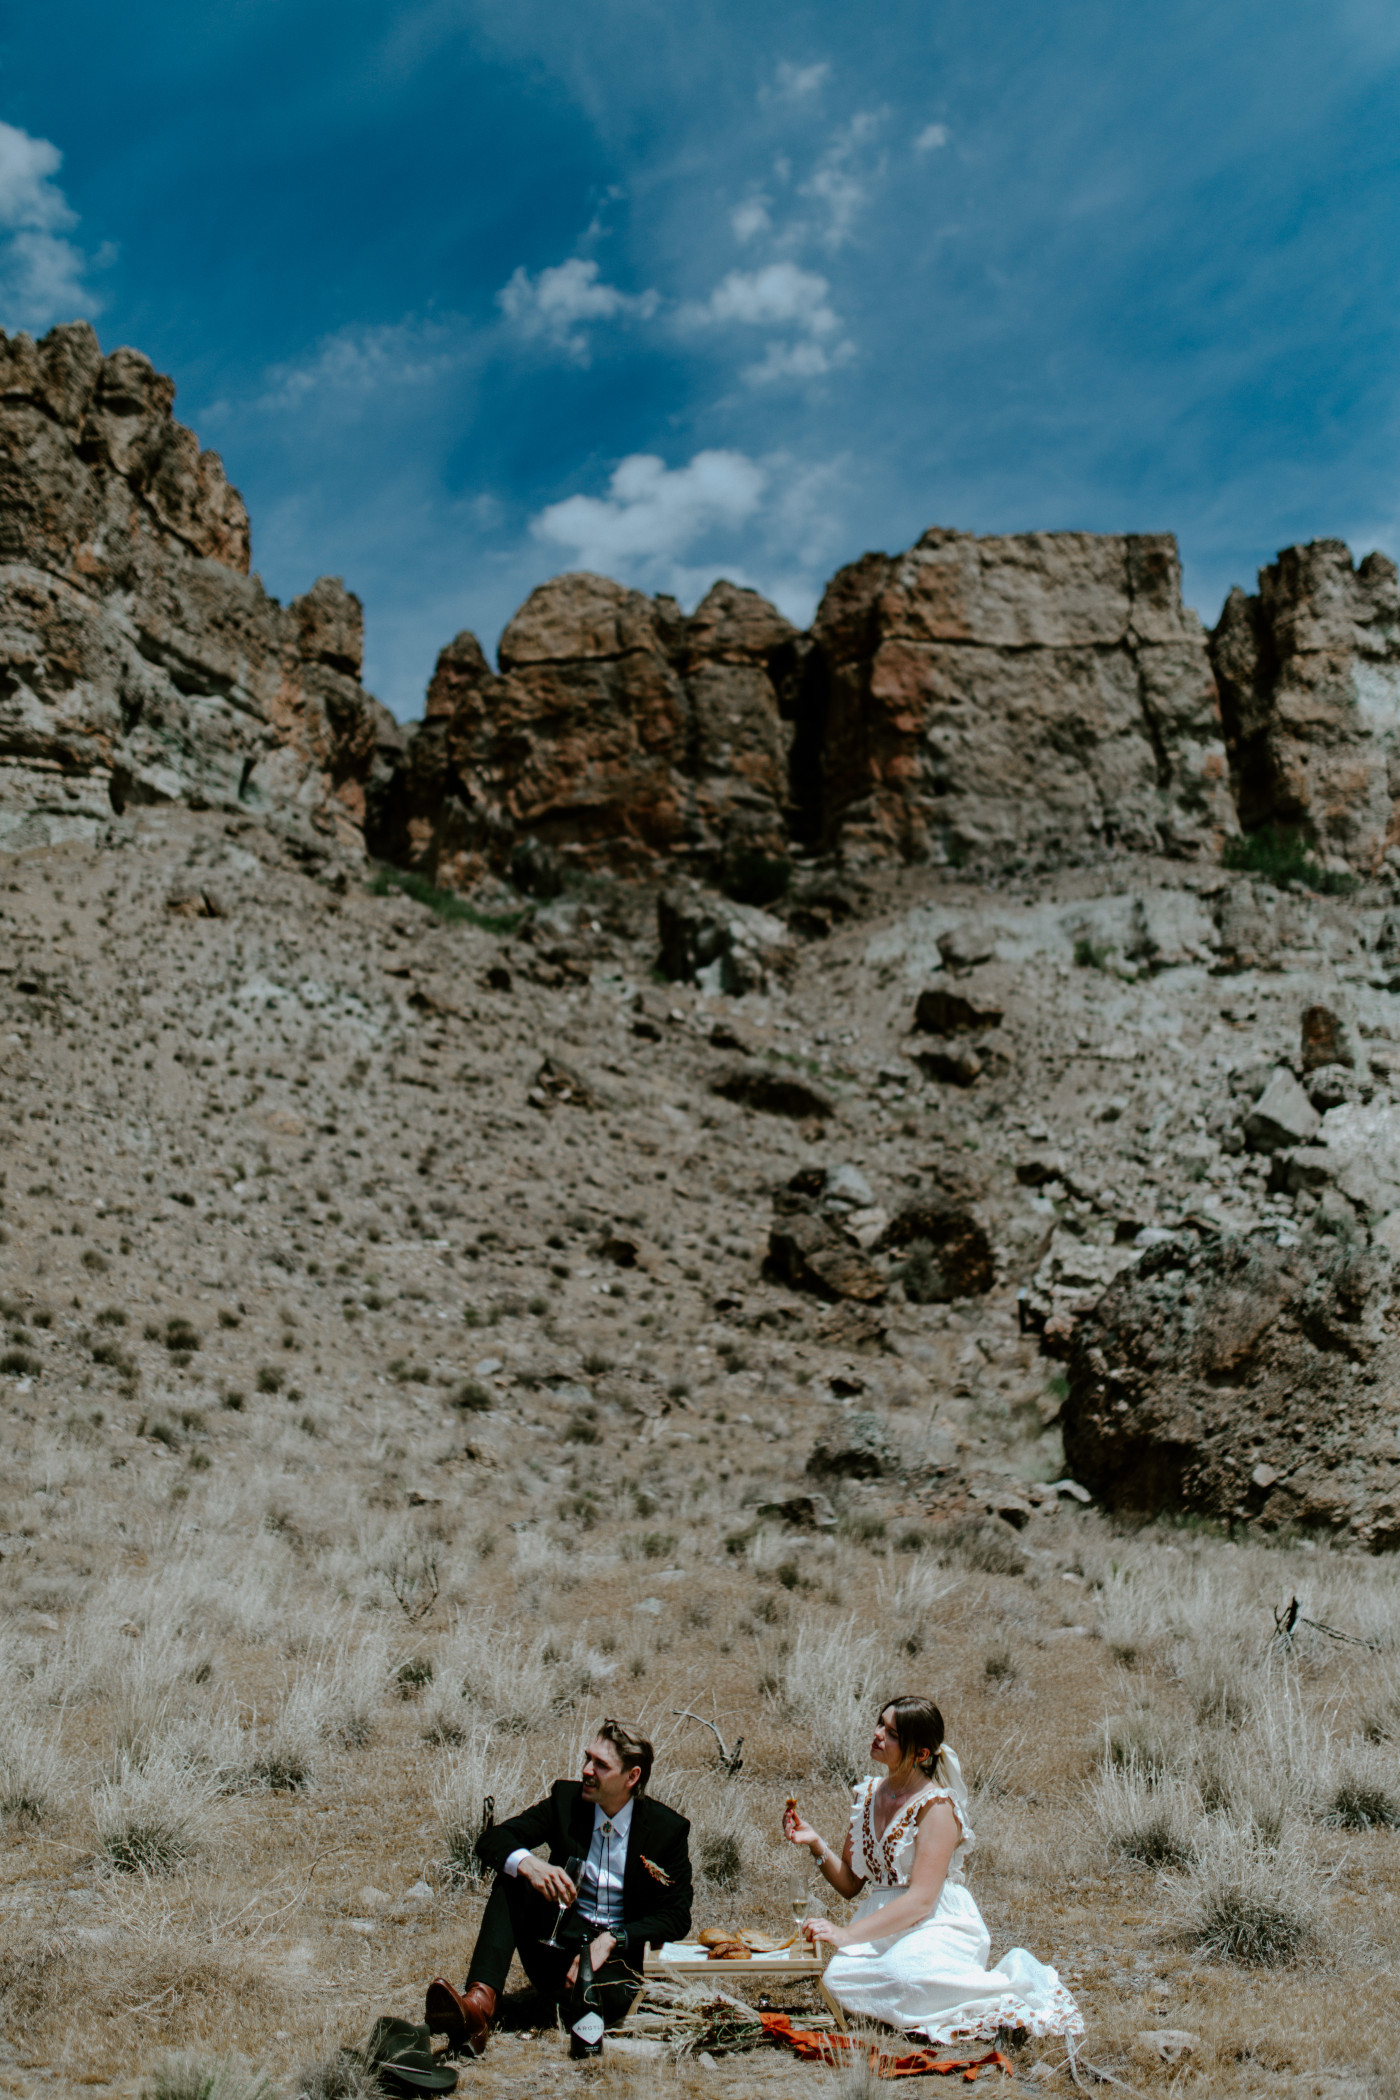 Greyson and Emily look out at the scenery. Elopement photography in the Central Oregon desert by Sienna Plus Josh.